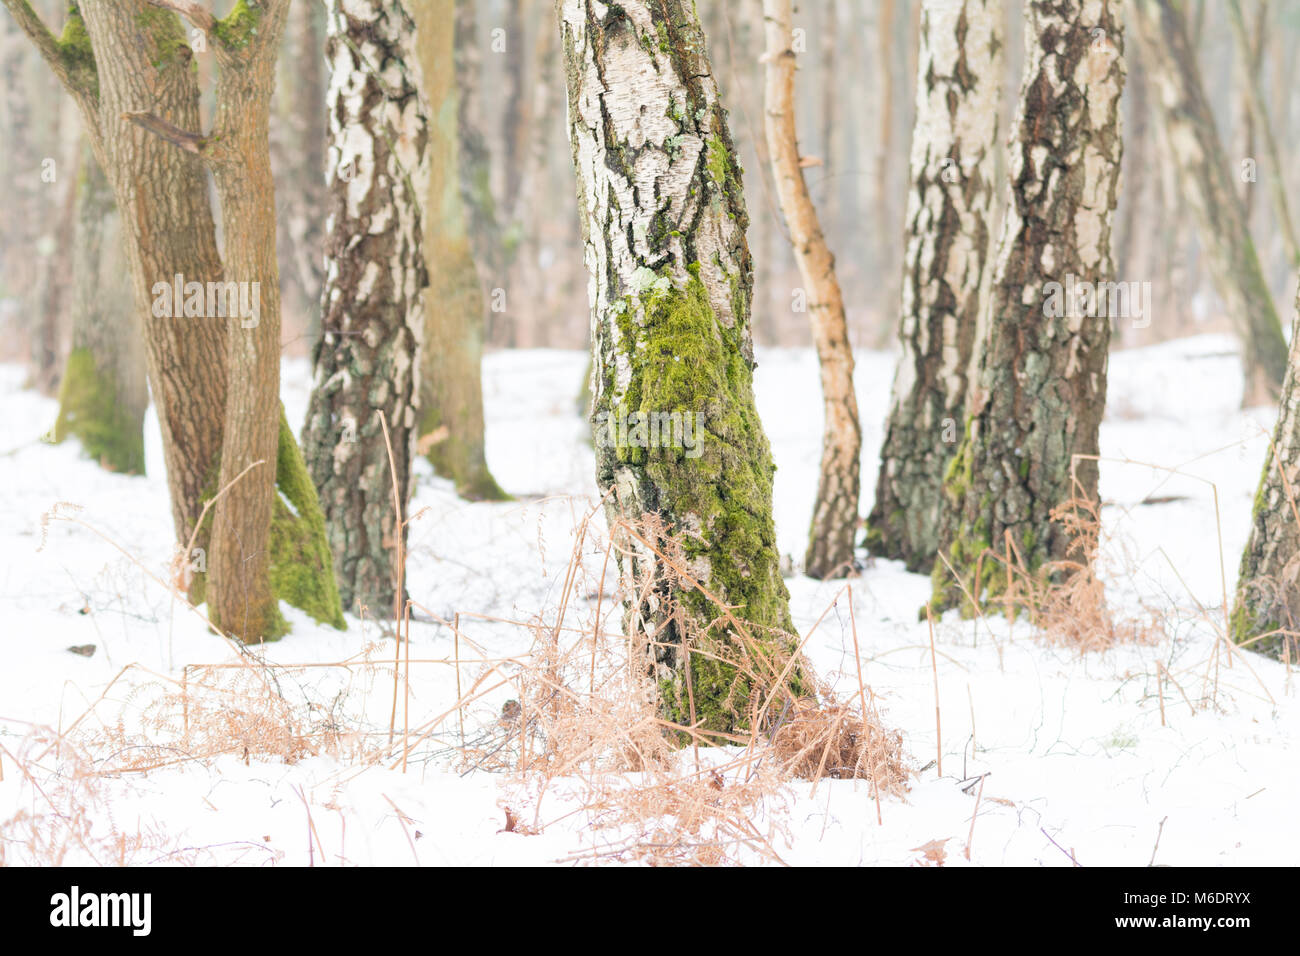 Winter woodland scene with silver birch trees and snow Stock Photo